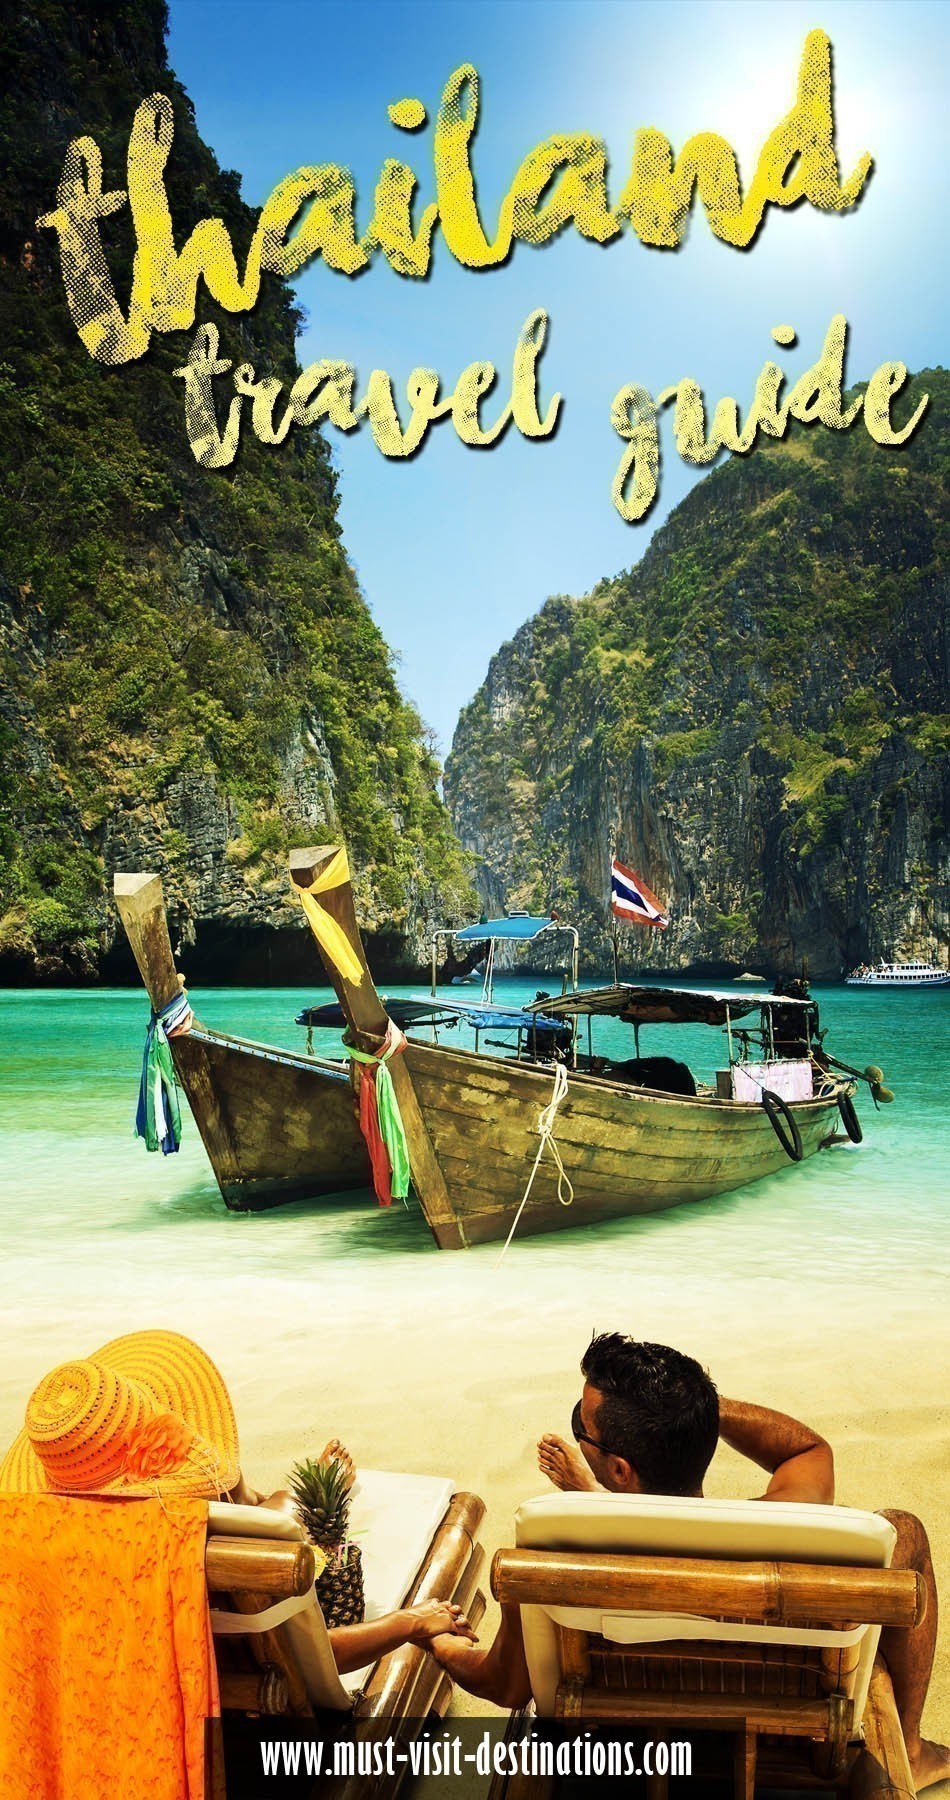 With sixteen million foreign travellers visiting THAILAND every year, it’s important to create a blueprint of the trip much in advance to ensure a fun-filled vacation. Here are some tips for you on the exotic places to visit and what to do in THAILAND.